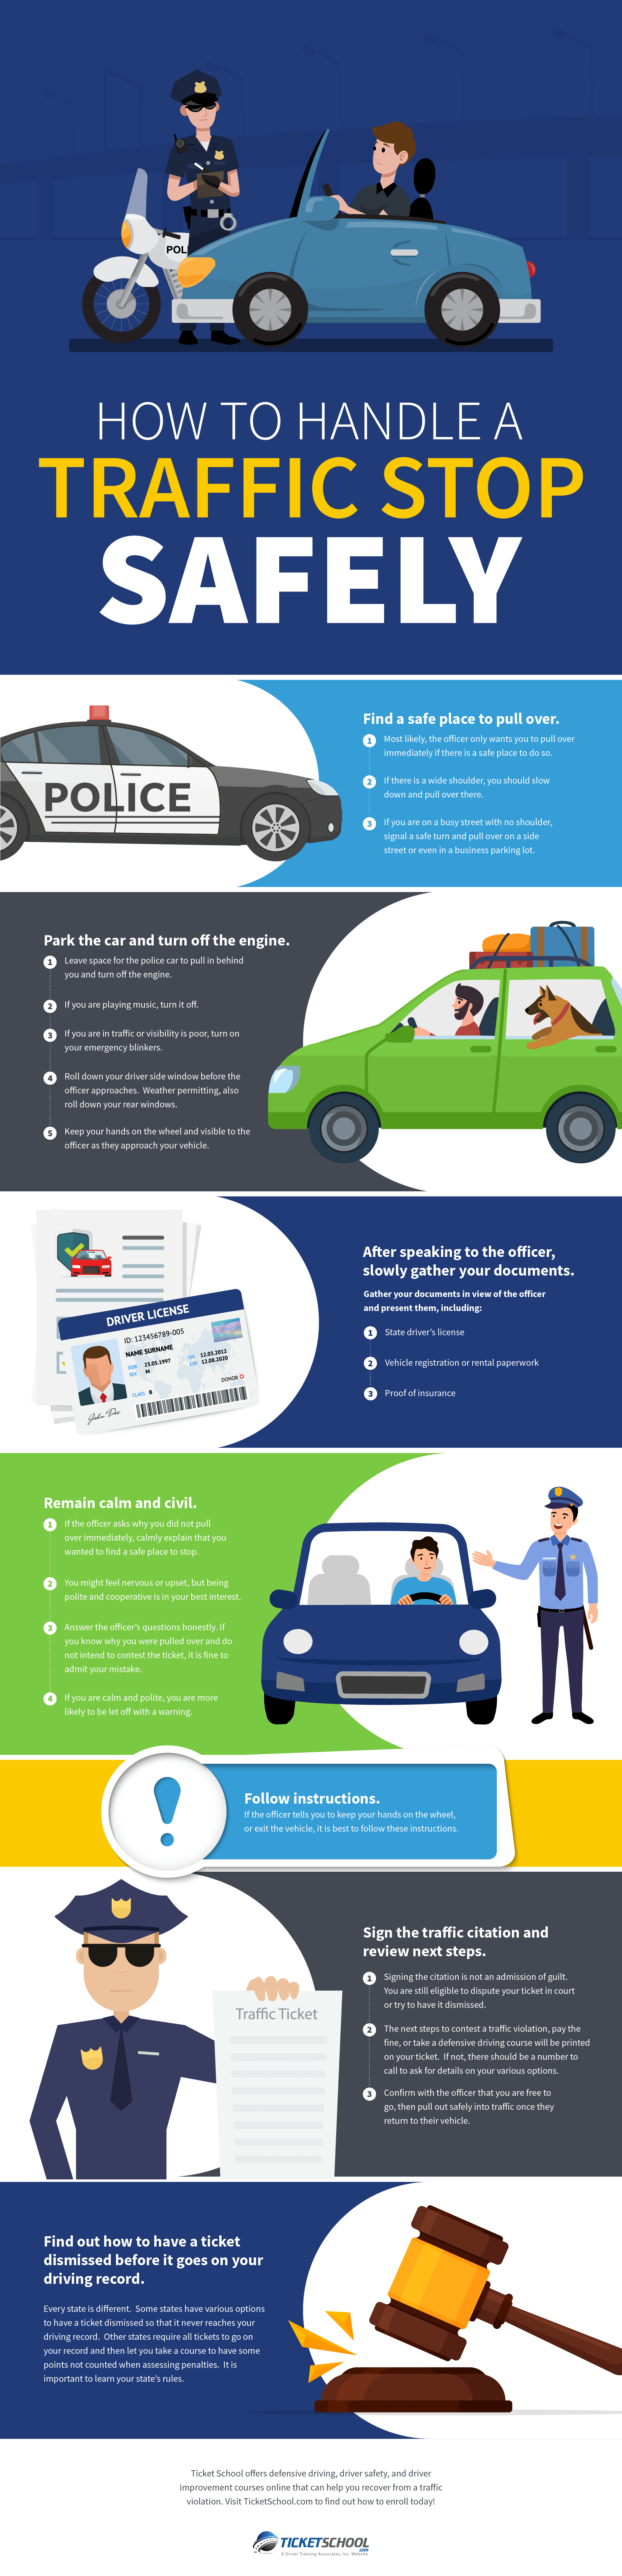 How to Handle a Traffic Stop Safely Infographic